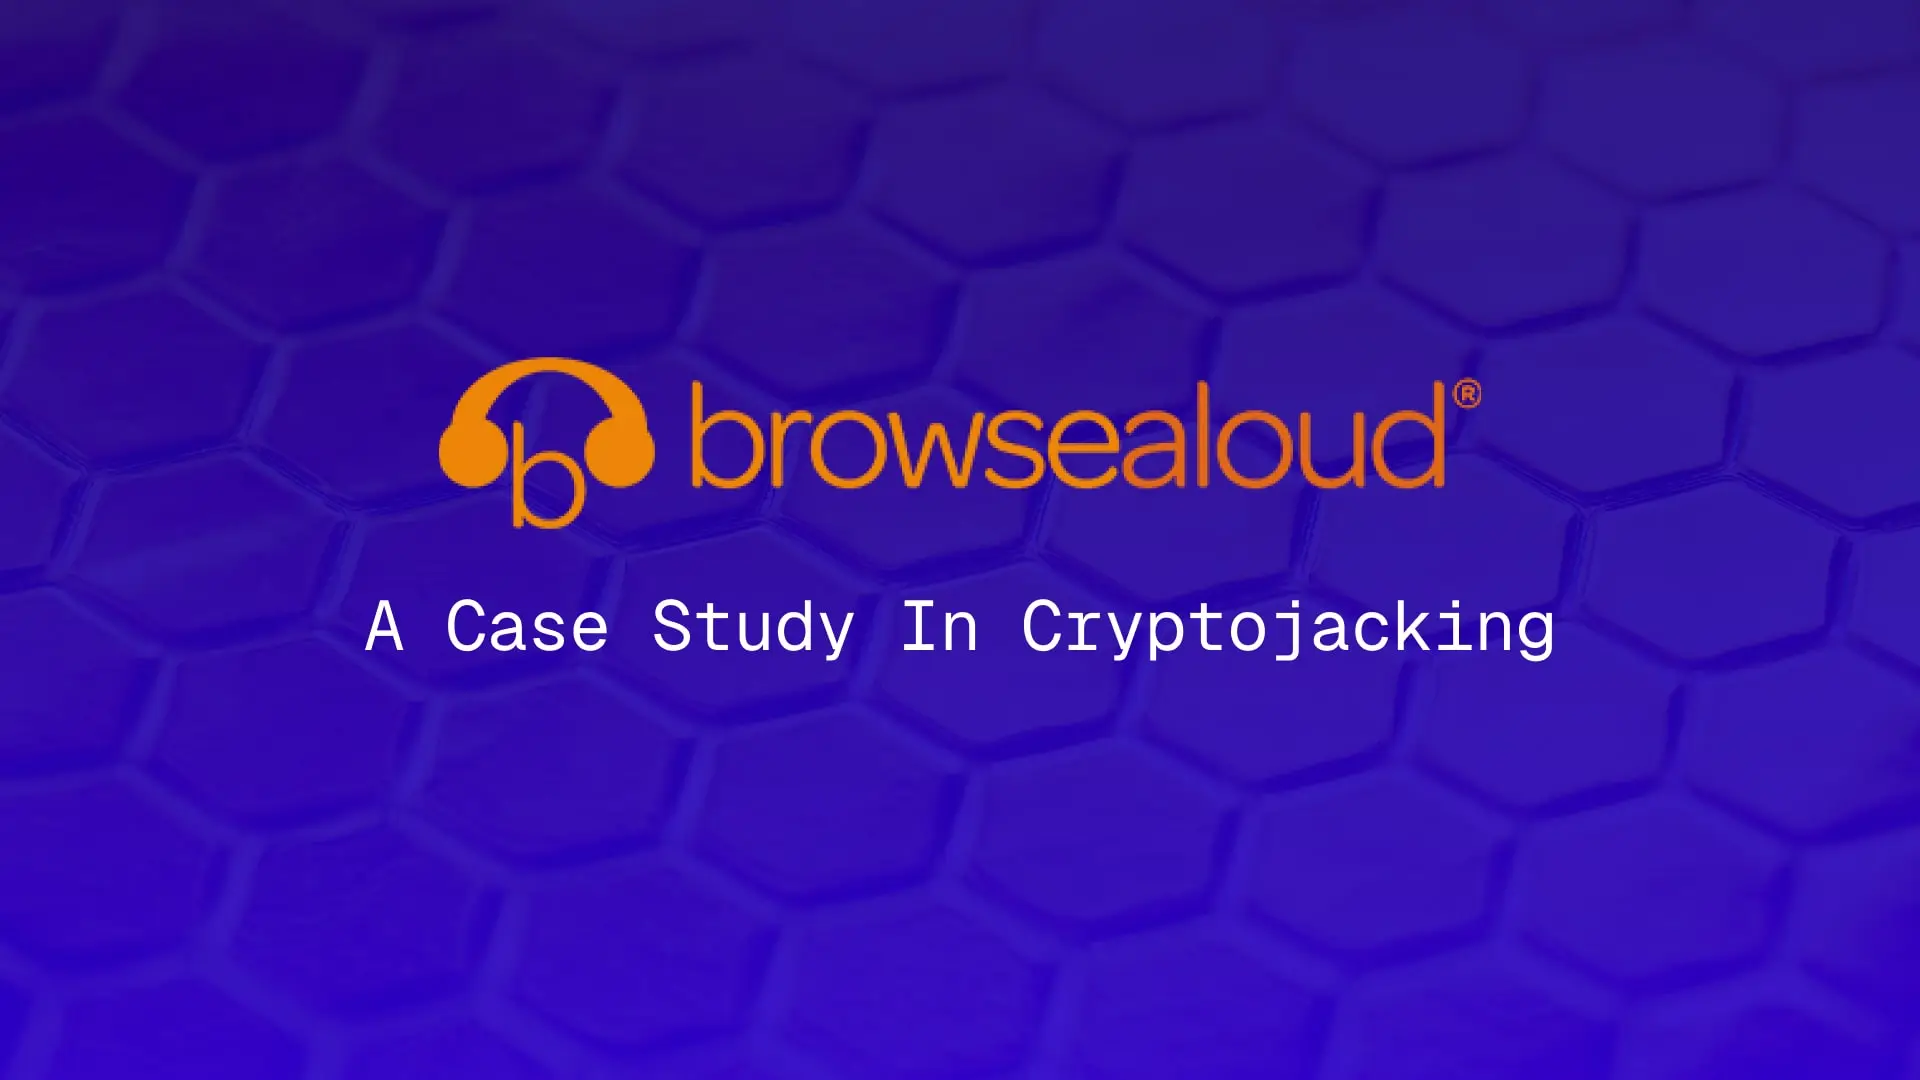 The BrowseAloud logo with the text "a case study in cryptojacking" on a blue background with a subtle hive pattern behind, referring to CoinHive.